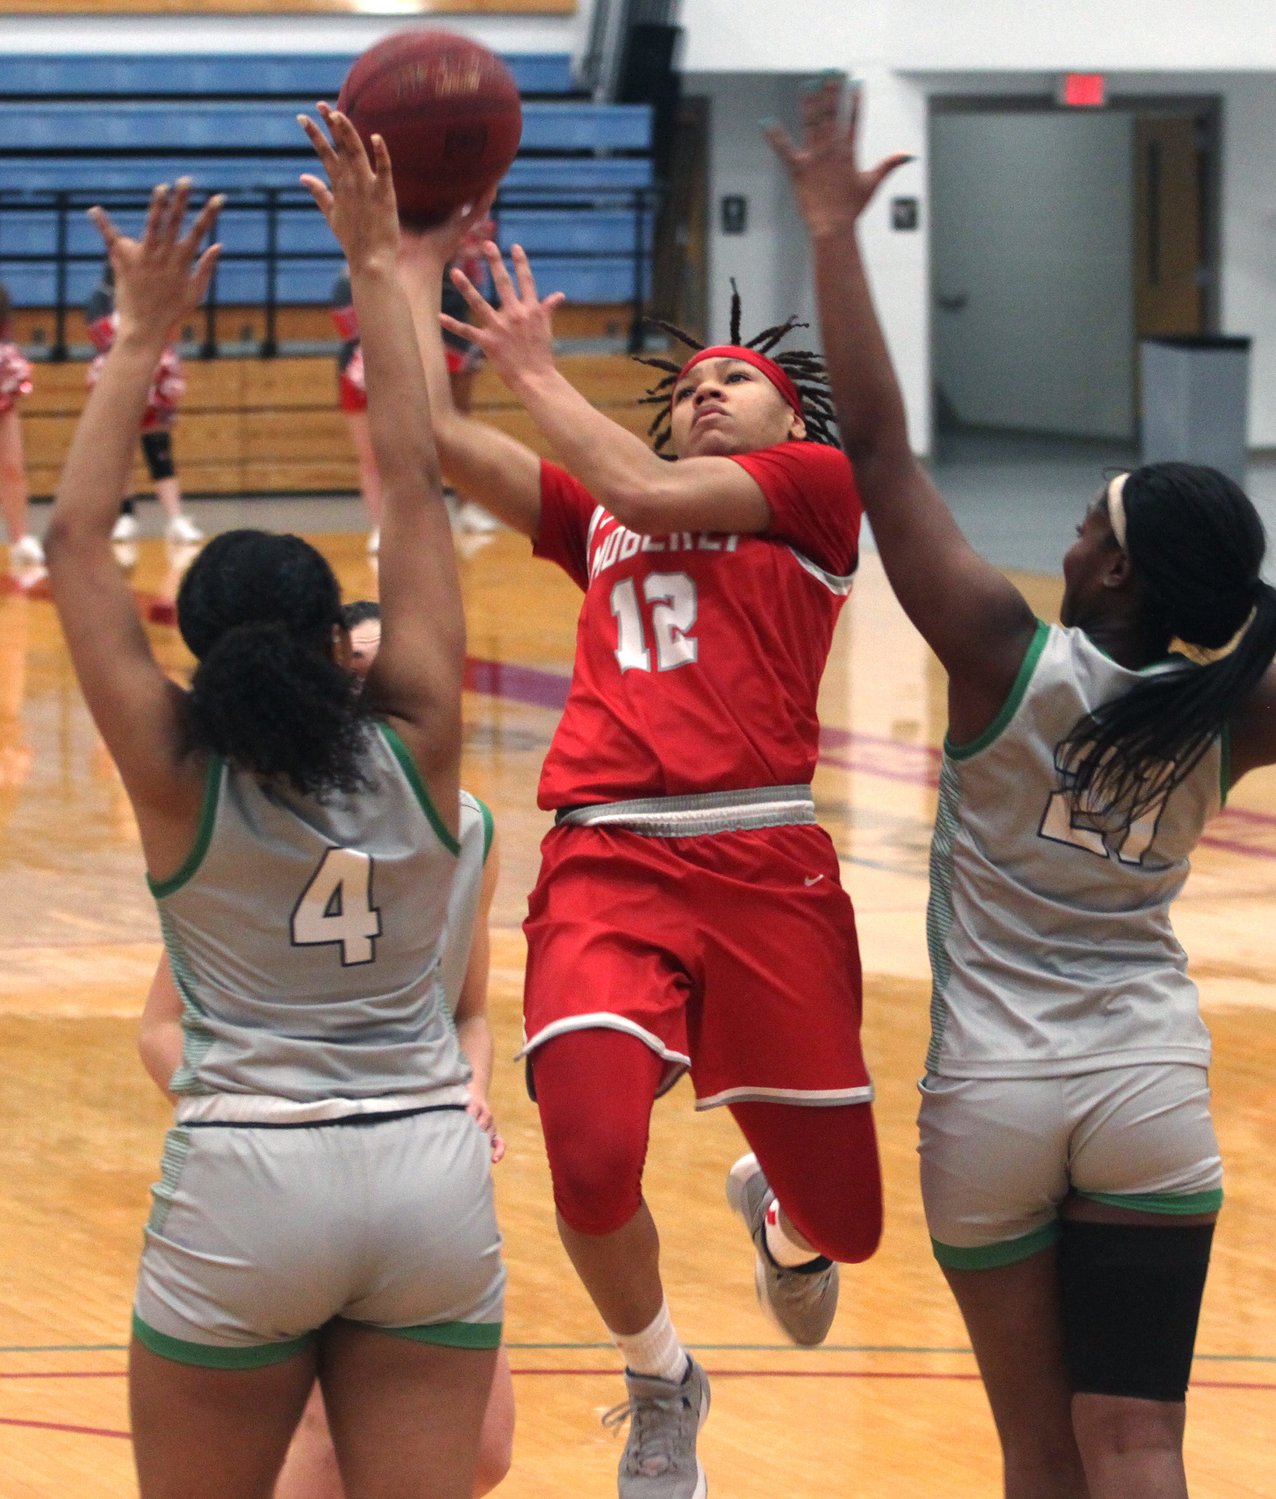 Moberly Area Community College sophomore Bi'Anna Pettis splits the seams of Spoon River College's Jai'Renee McCoy (#4) and T'Alla Brown as she attacks the rim and draws a foul Saturday. Pettis made three free throws to help the Lady Greyhounds earn a104-57 home victory at the Orscheln Industries Classic.